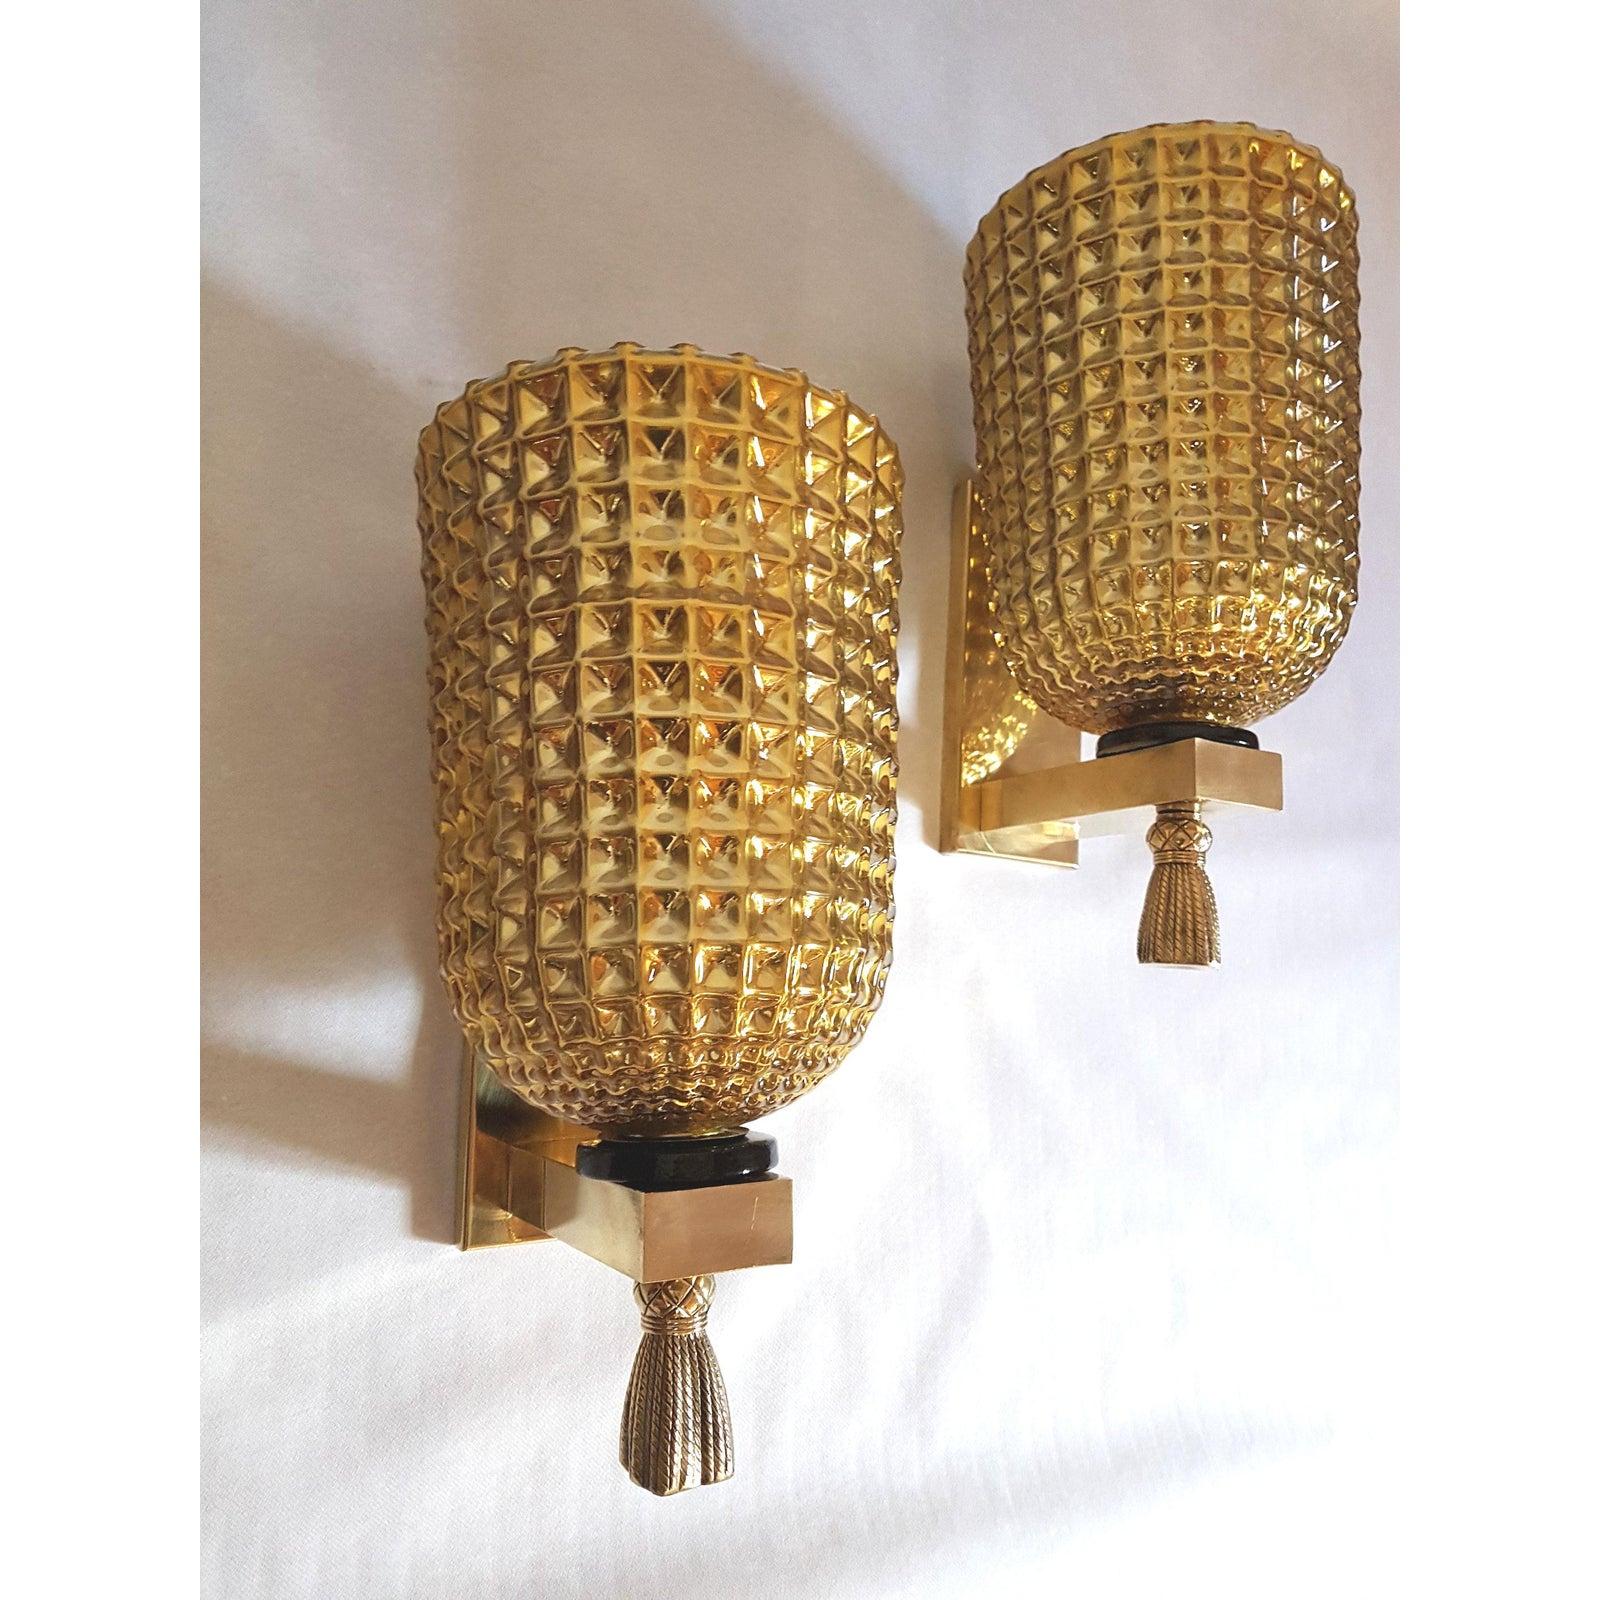 Pair of gold mirrored Mid-Century Modern Murano glass wall sconces, with brass mounts and bronze finials, attributed to Mazzega, Italy circa 1960s.
The mirrored Murano glass has a diamond pattern and is silvered inside.
The vintage sconces have